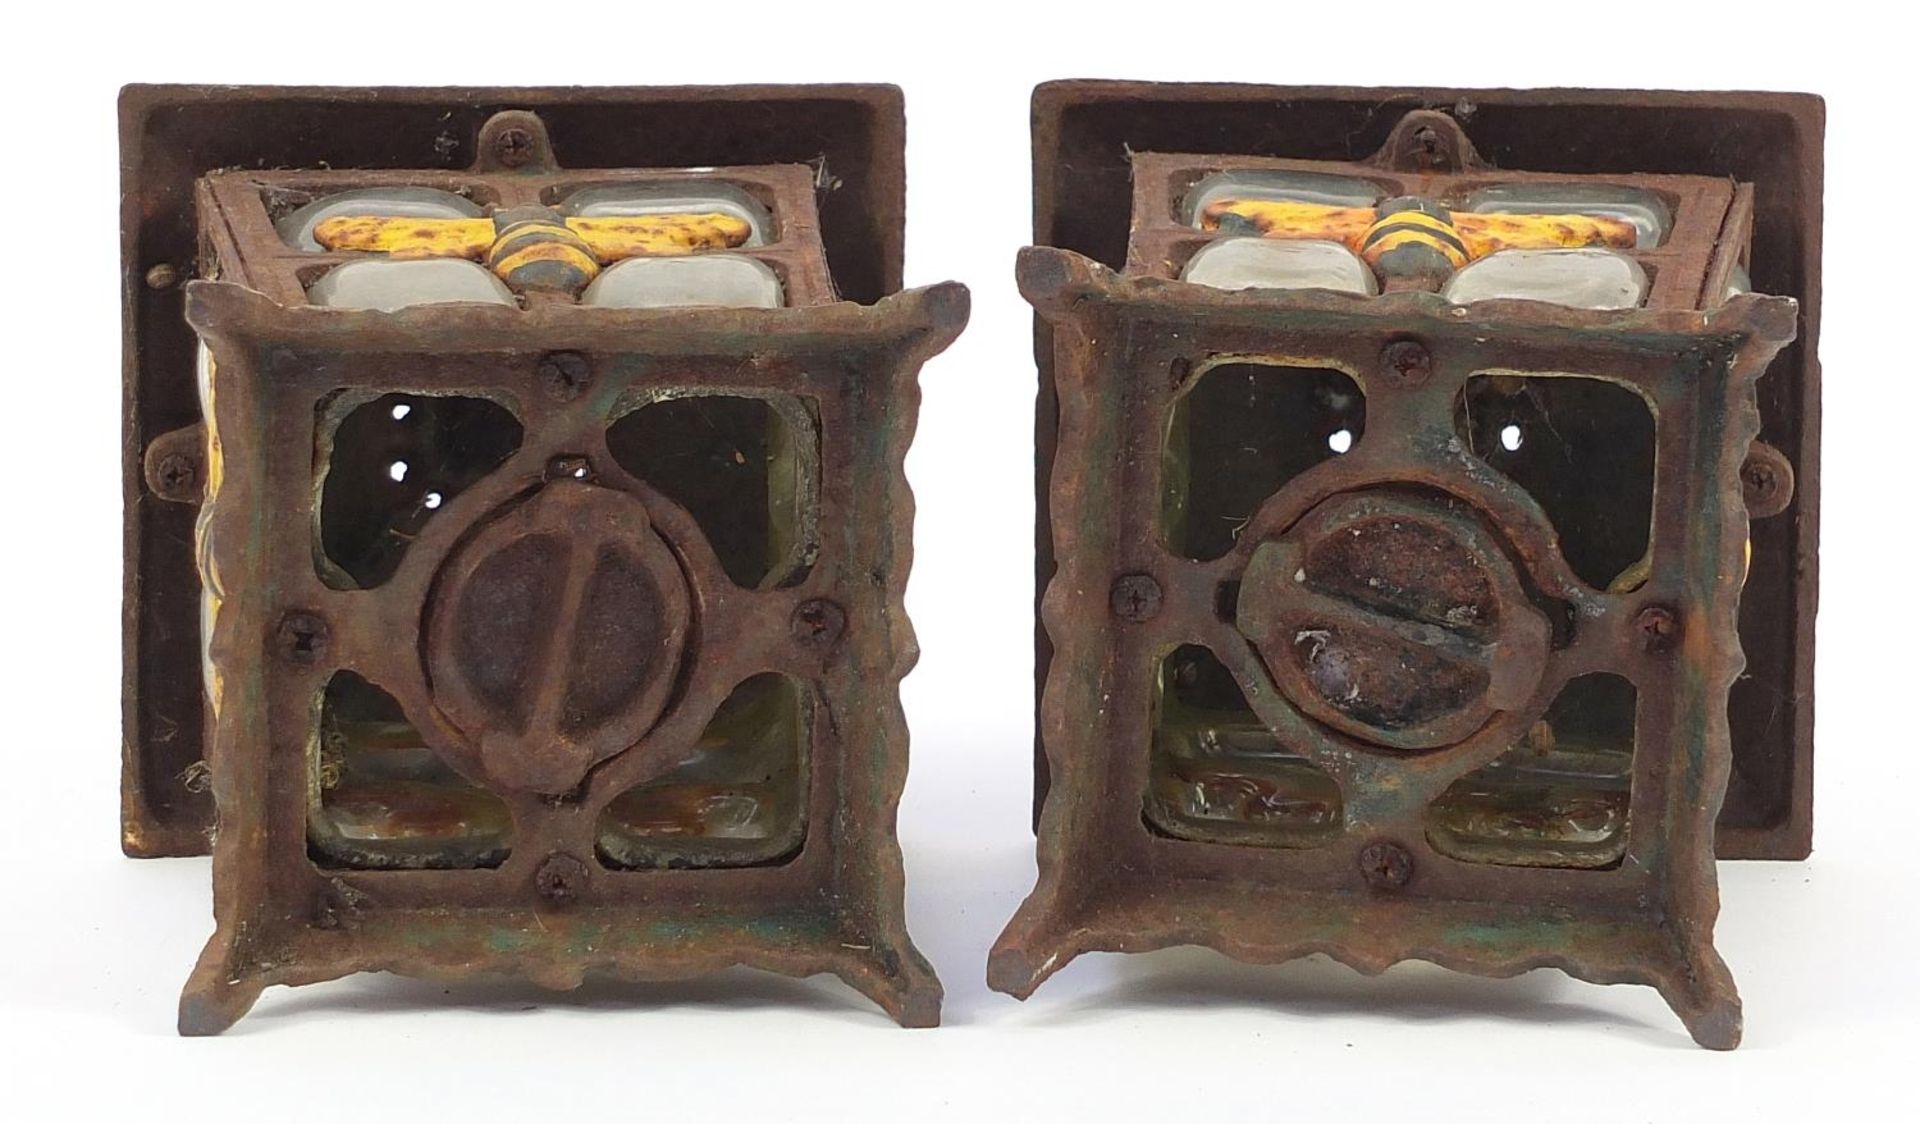 Pair of cast iron and glass garden tealight lanterns decorated with bumble bees, 23cm high - Image 3 of 3